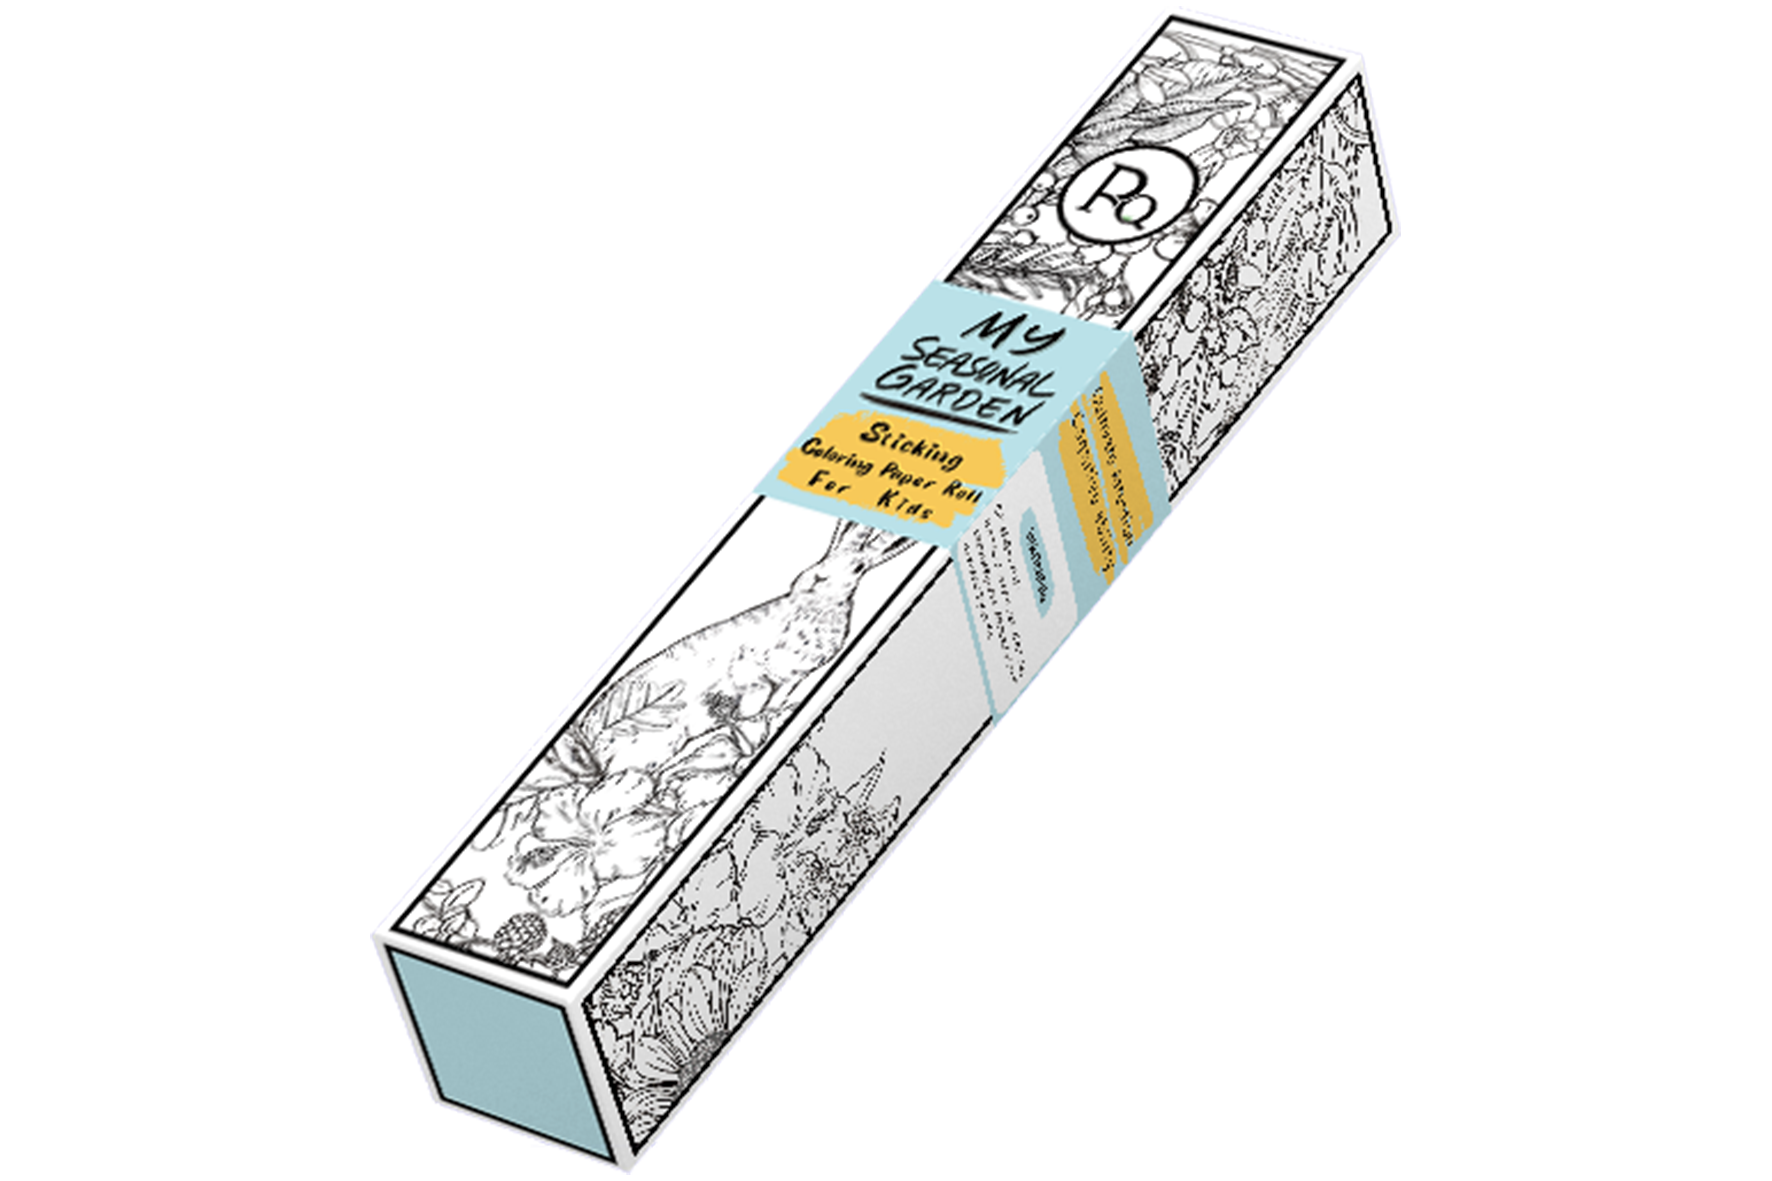 Sticking Coloring Paper Roll